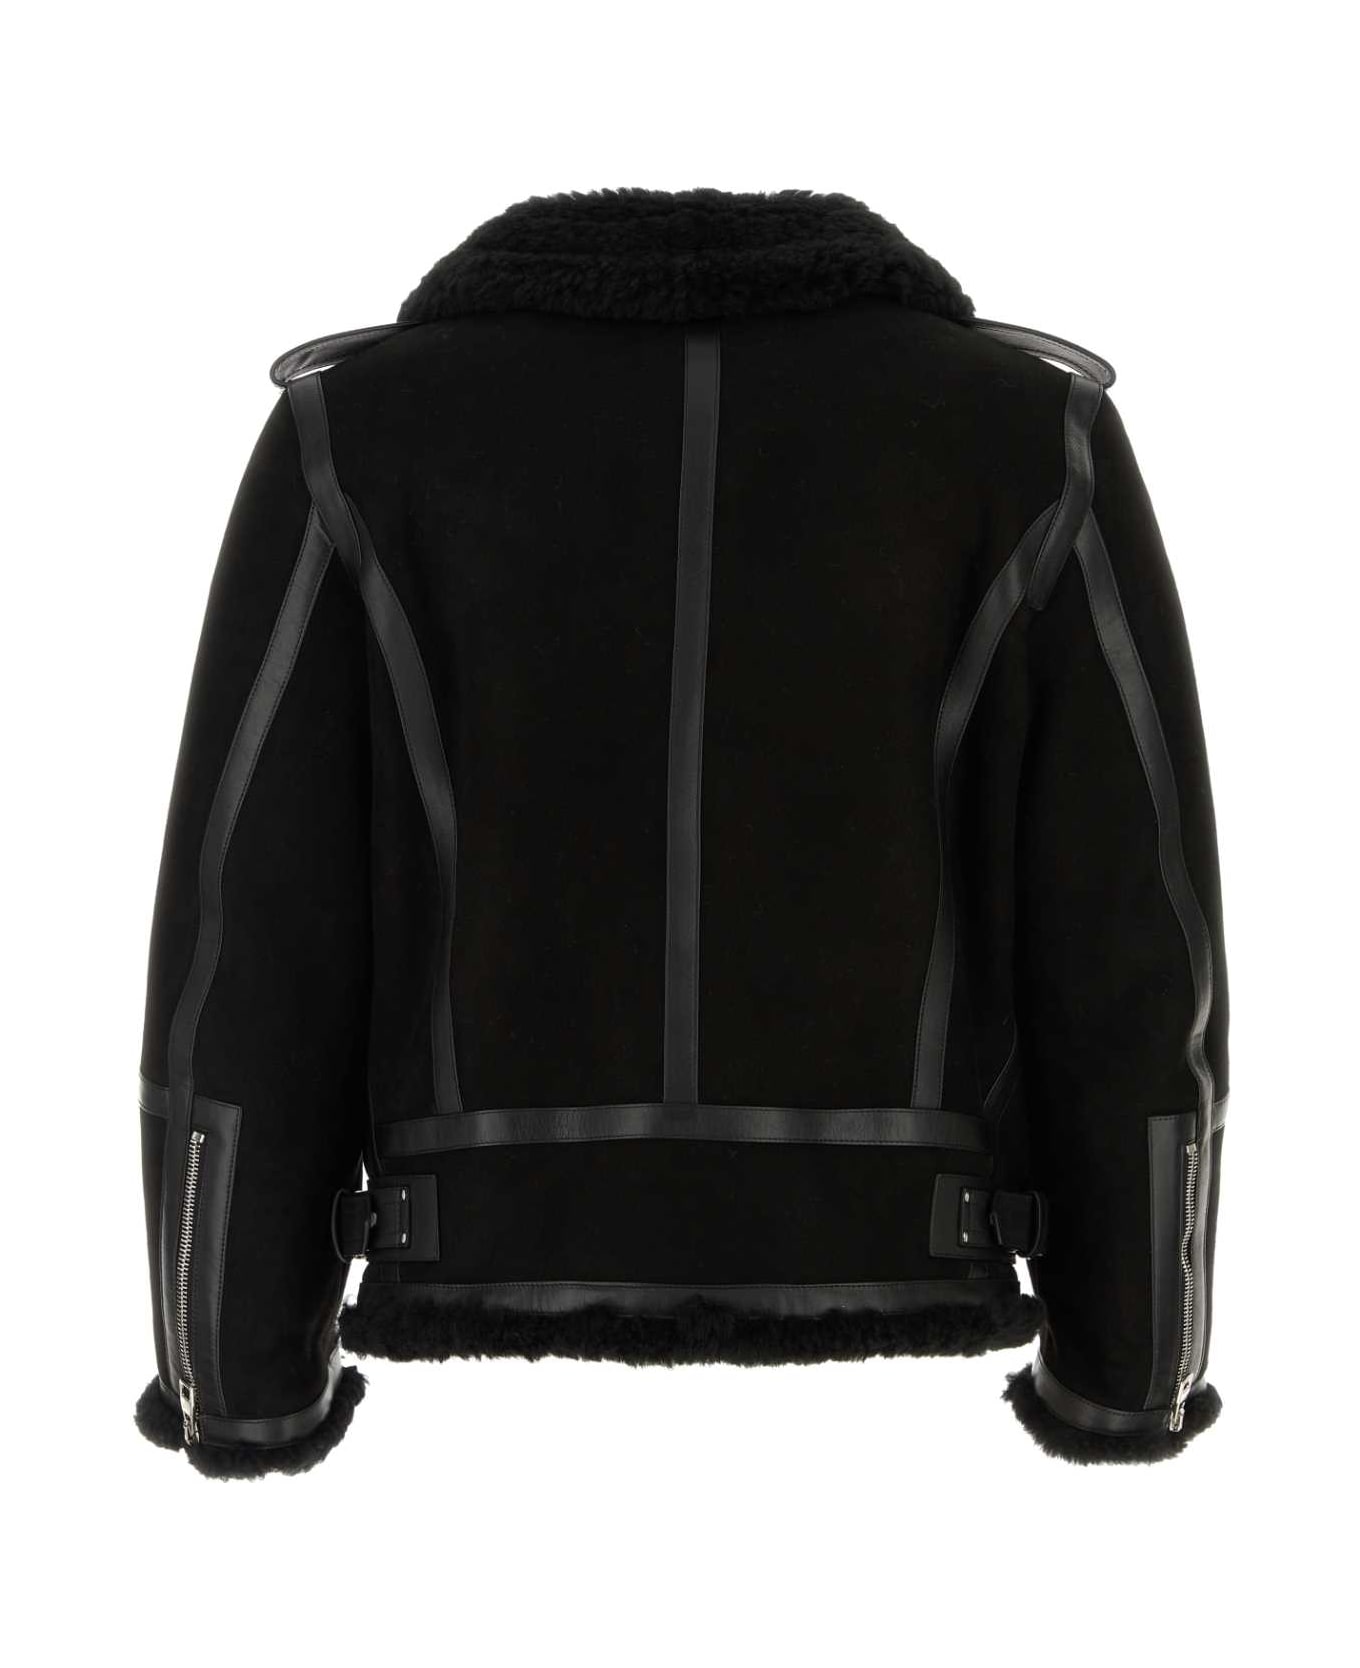 Alexander McQueen Black Shearling And Nappa Leather Jacket - Black ジャケット